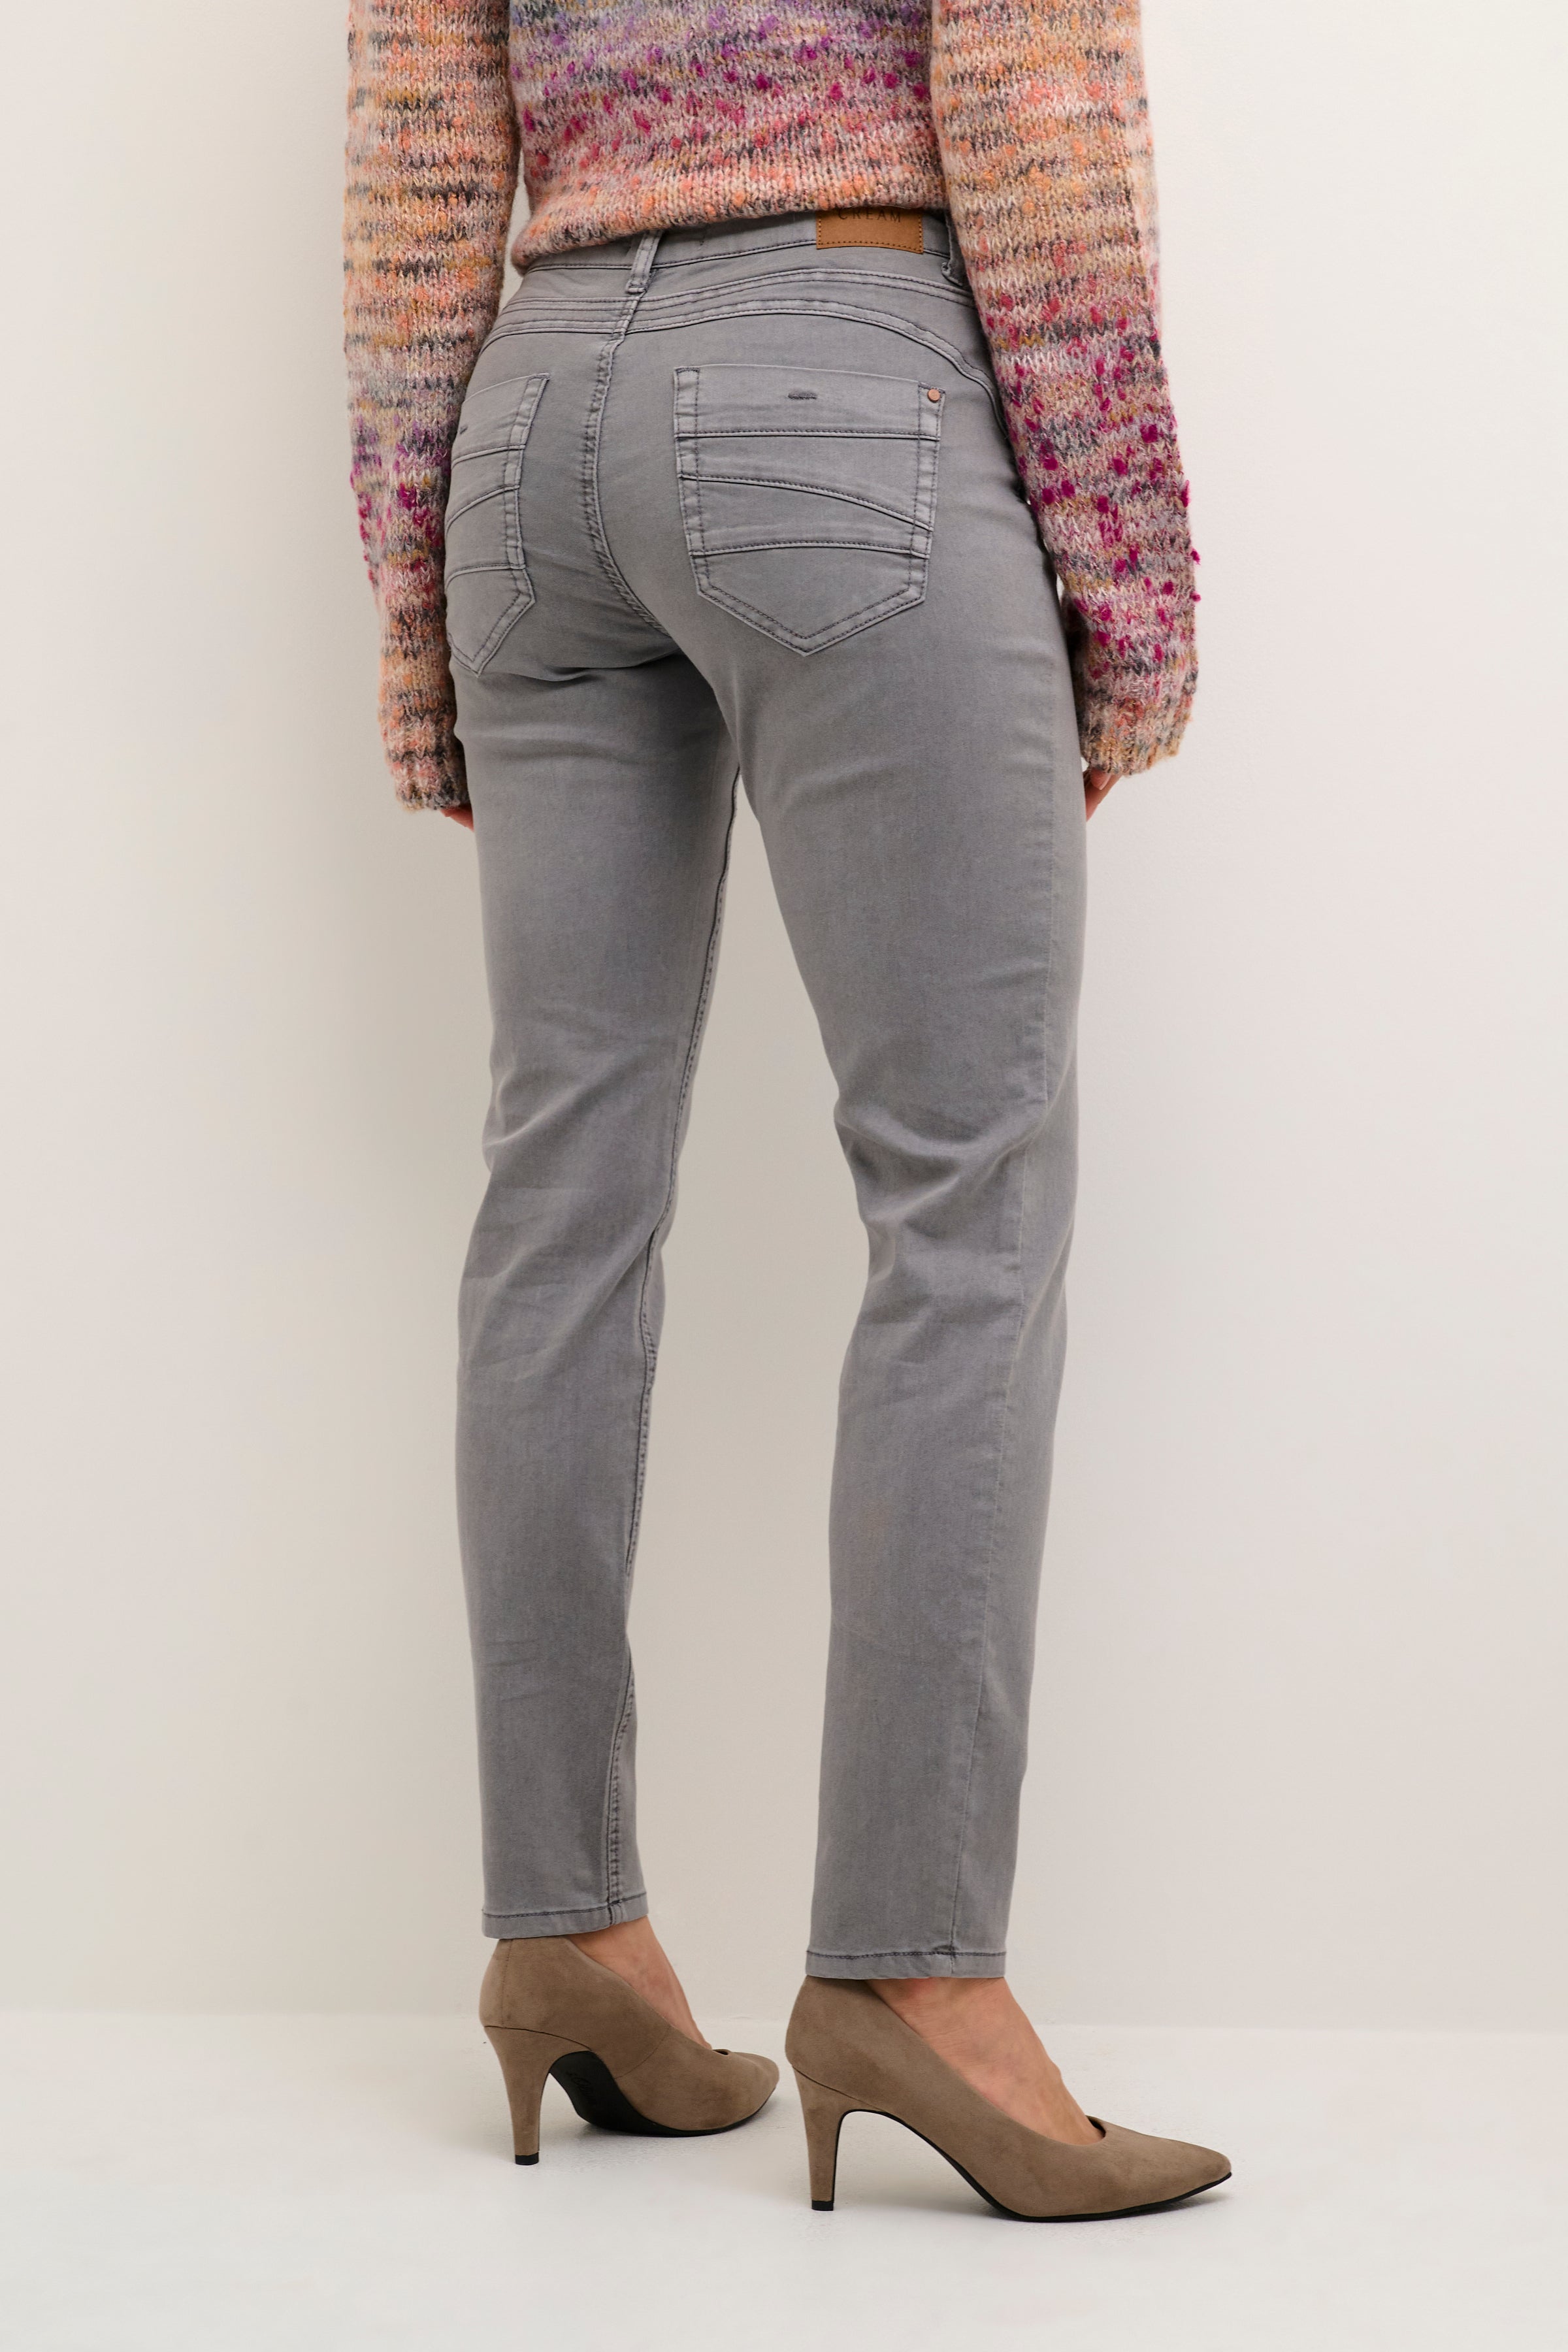 These Cream Lotte Plain Twill Jeans in a Coco Fit will take your outfit game to the next level. 